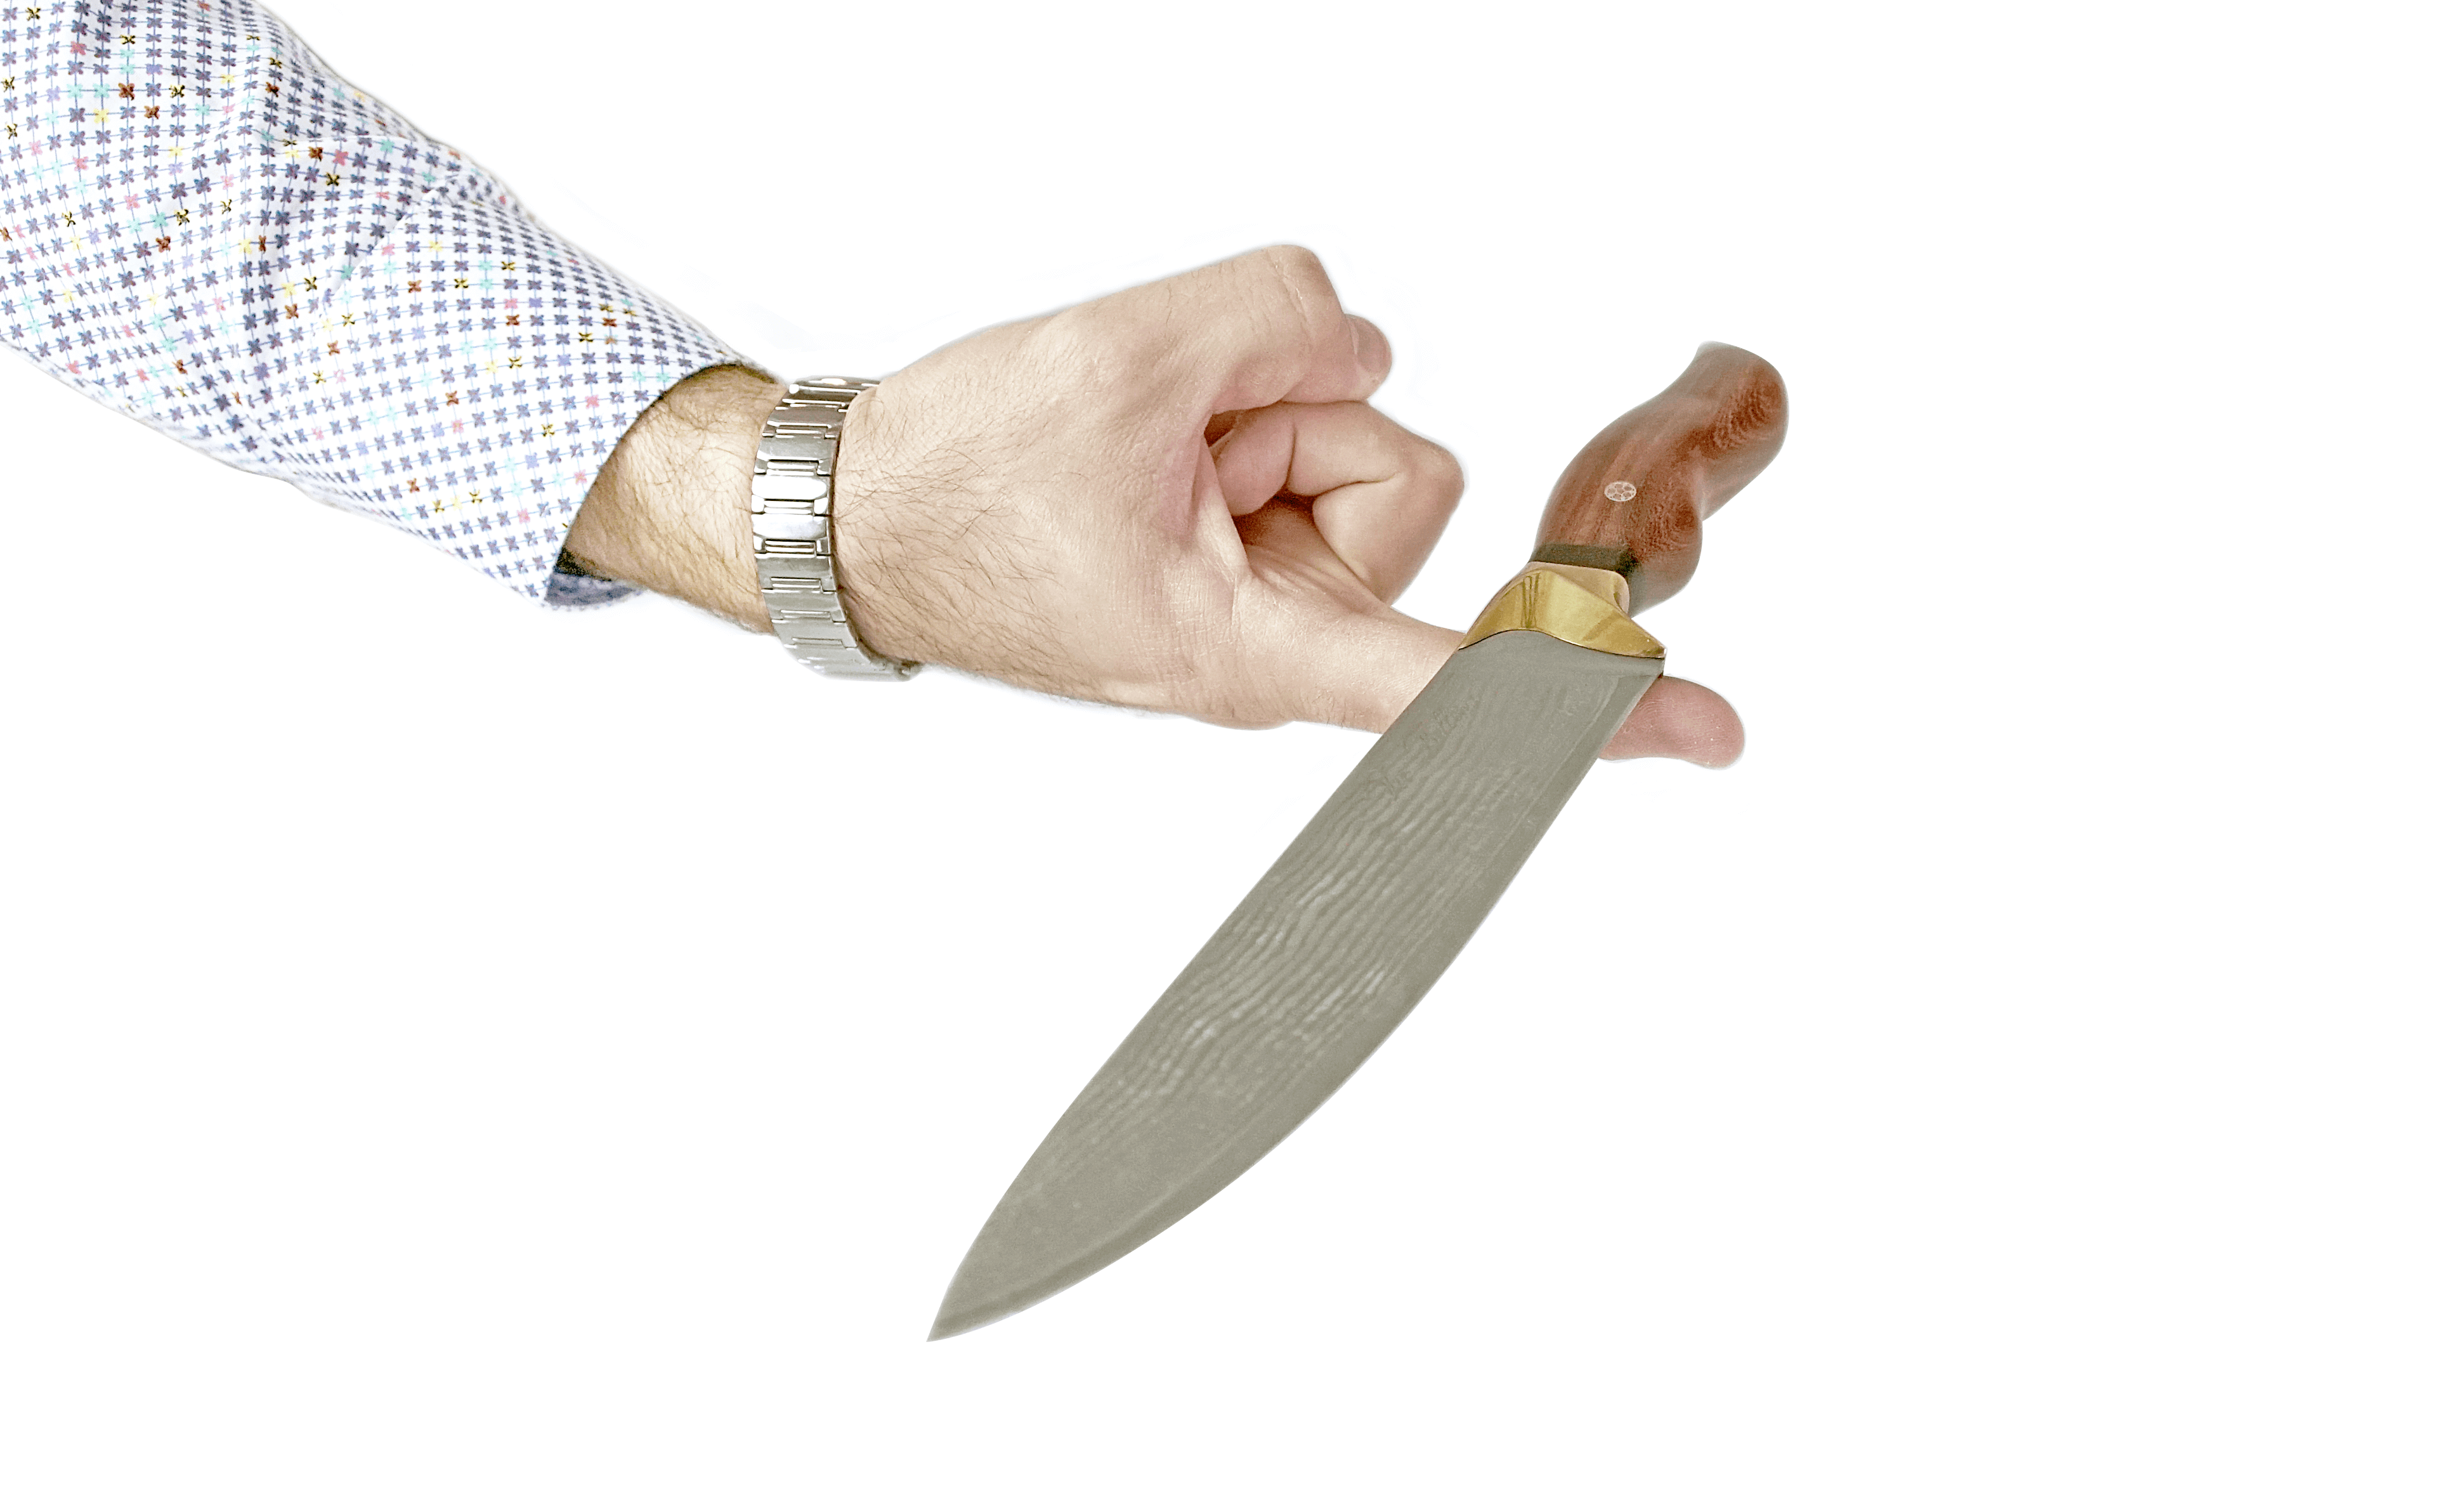 9 Things to know before buying a chef's knife